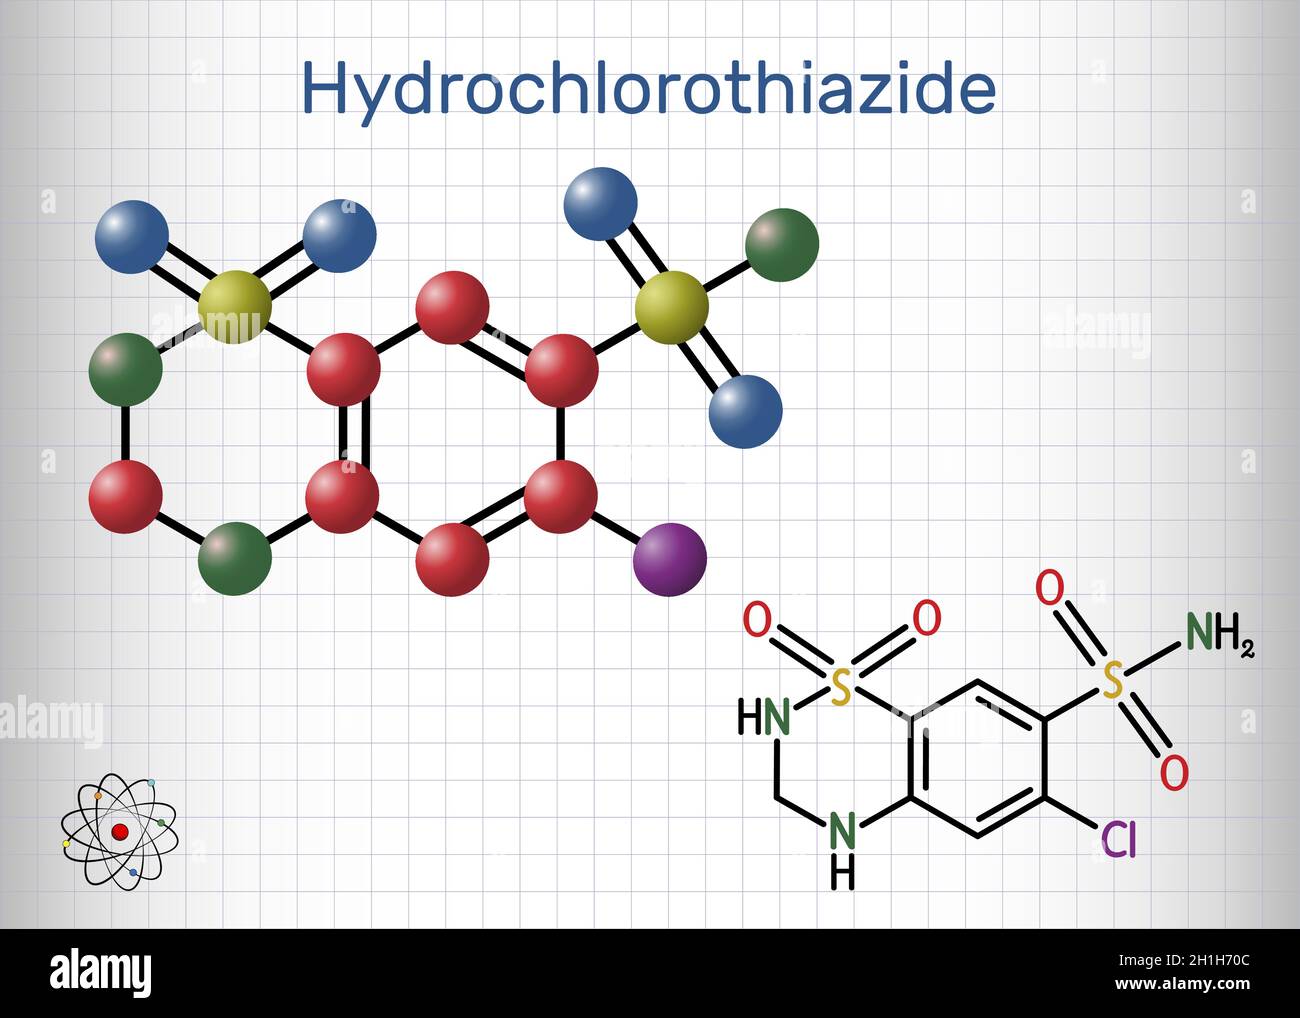 Hydrochlorothiazide, HCTZ, HCT molecule. It is thiazide diuretic, used to treat edema and hypertension. Structural chemical formula and molecule model Stock Vector